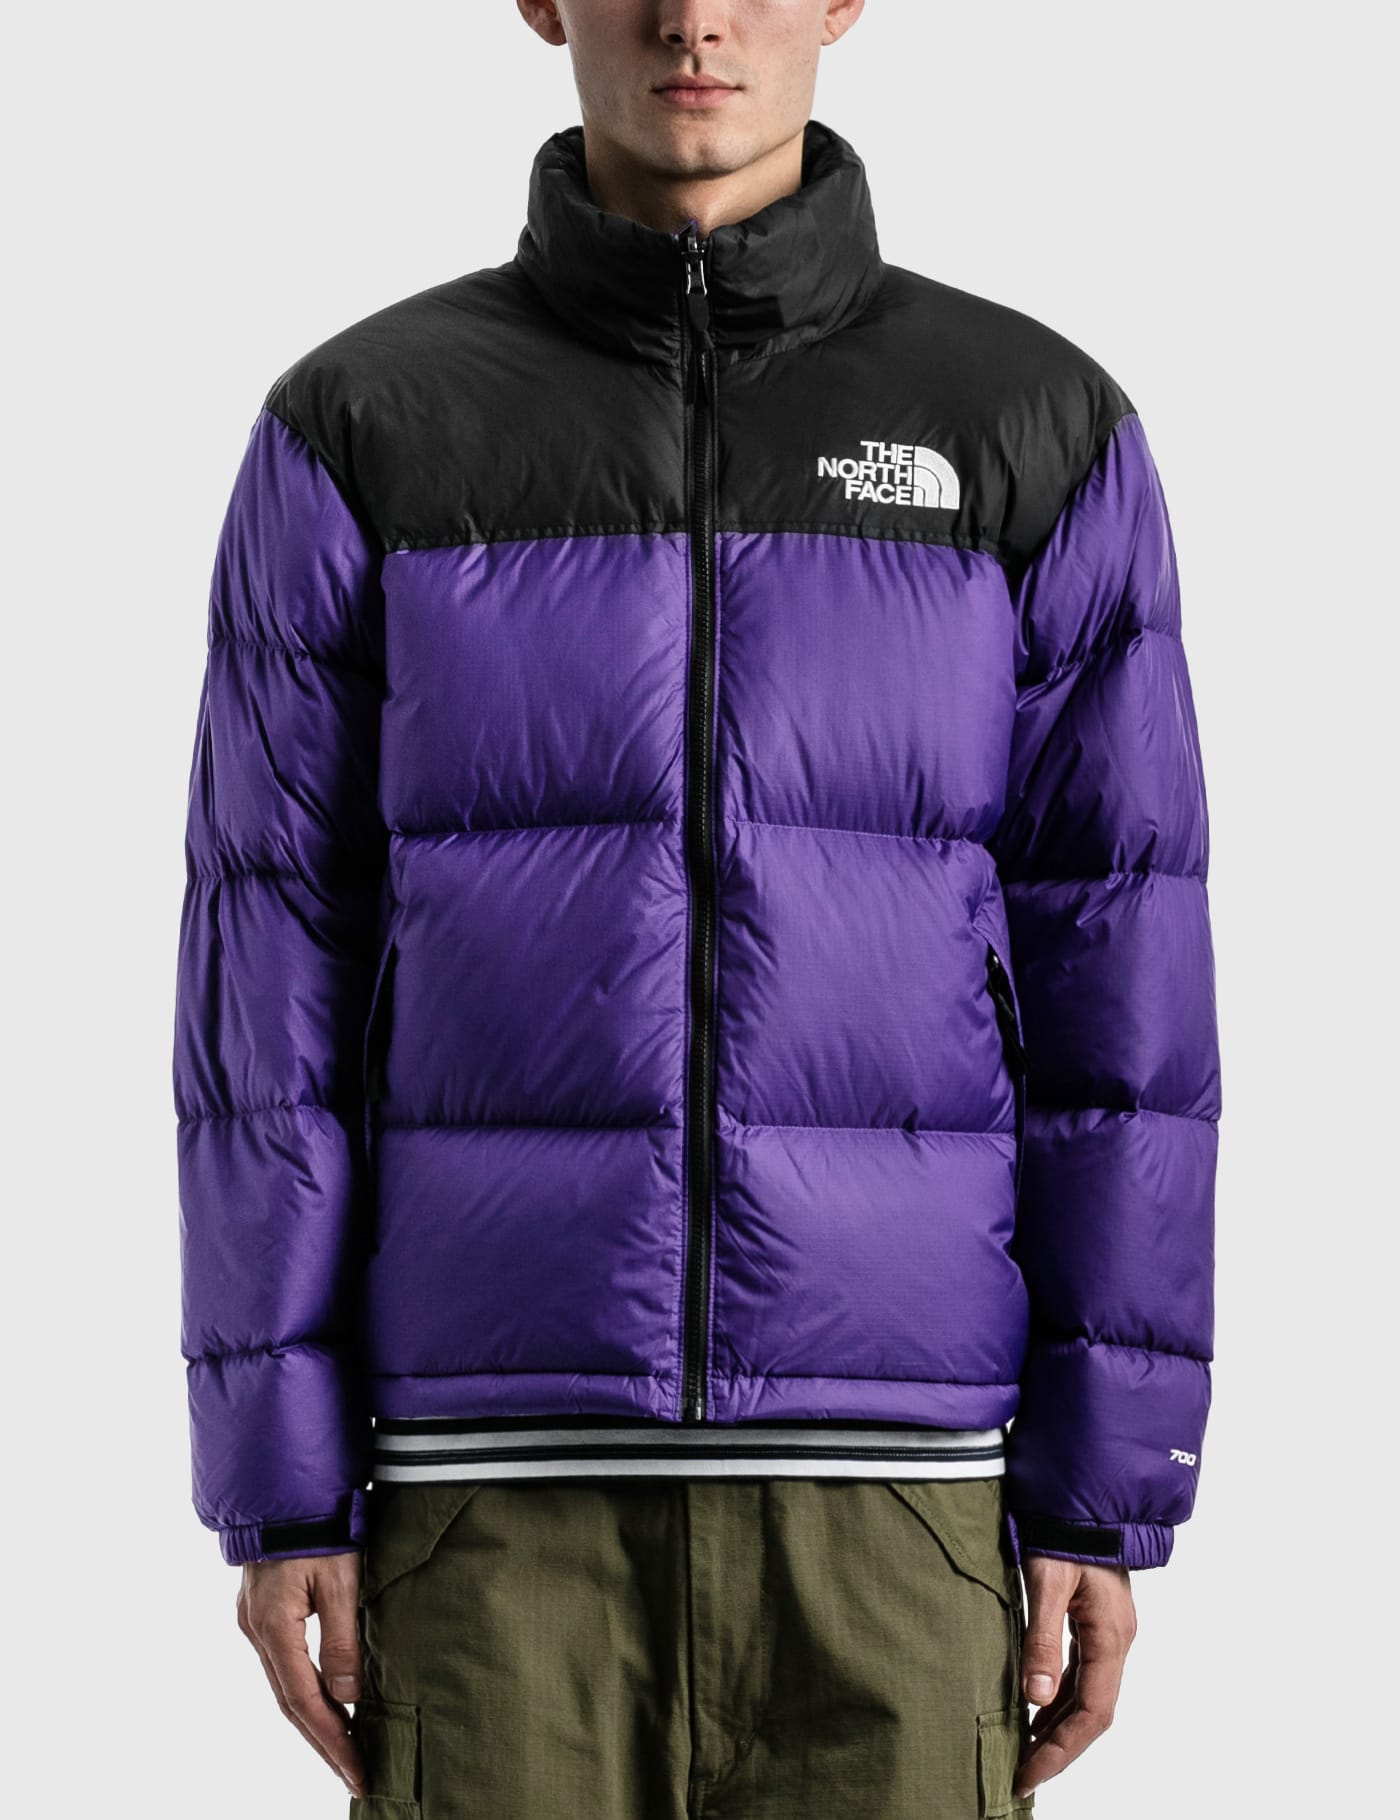 The North Face - 1996 Retro Nuptse Jacket | HBX - Globally Curated